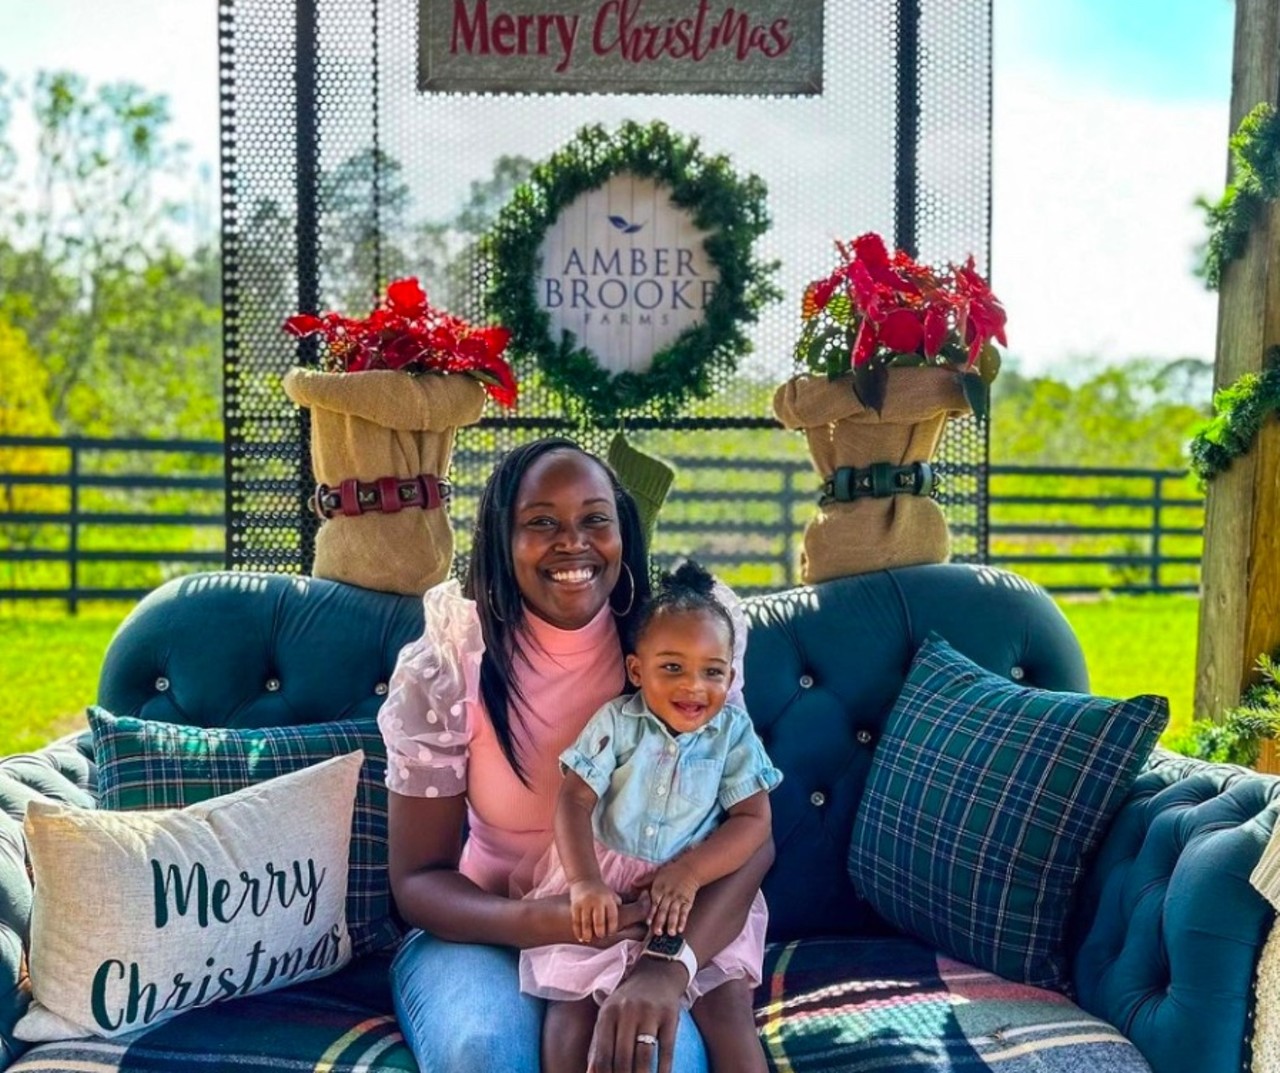 Amber Brooke Farms' Winter Fest 
36111 County Road 44A, Eustis
Dates open: Dec. 9-17
Cost: $15 standard admission
Photos with Santa, strawberry and sunflower U-pick, holiday-themed photo-ops, live music, seasonal treats, farm activities and more.